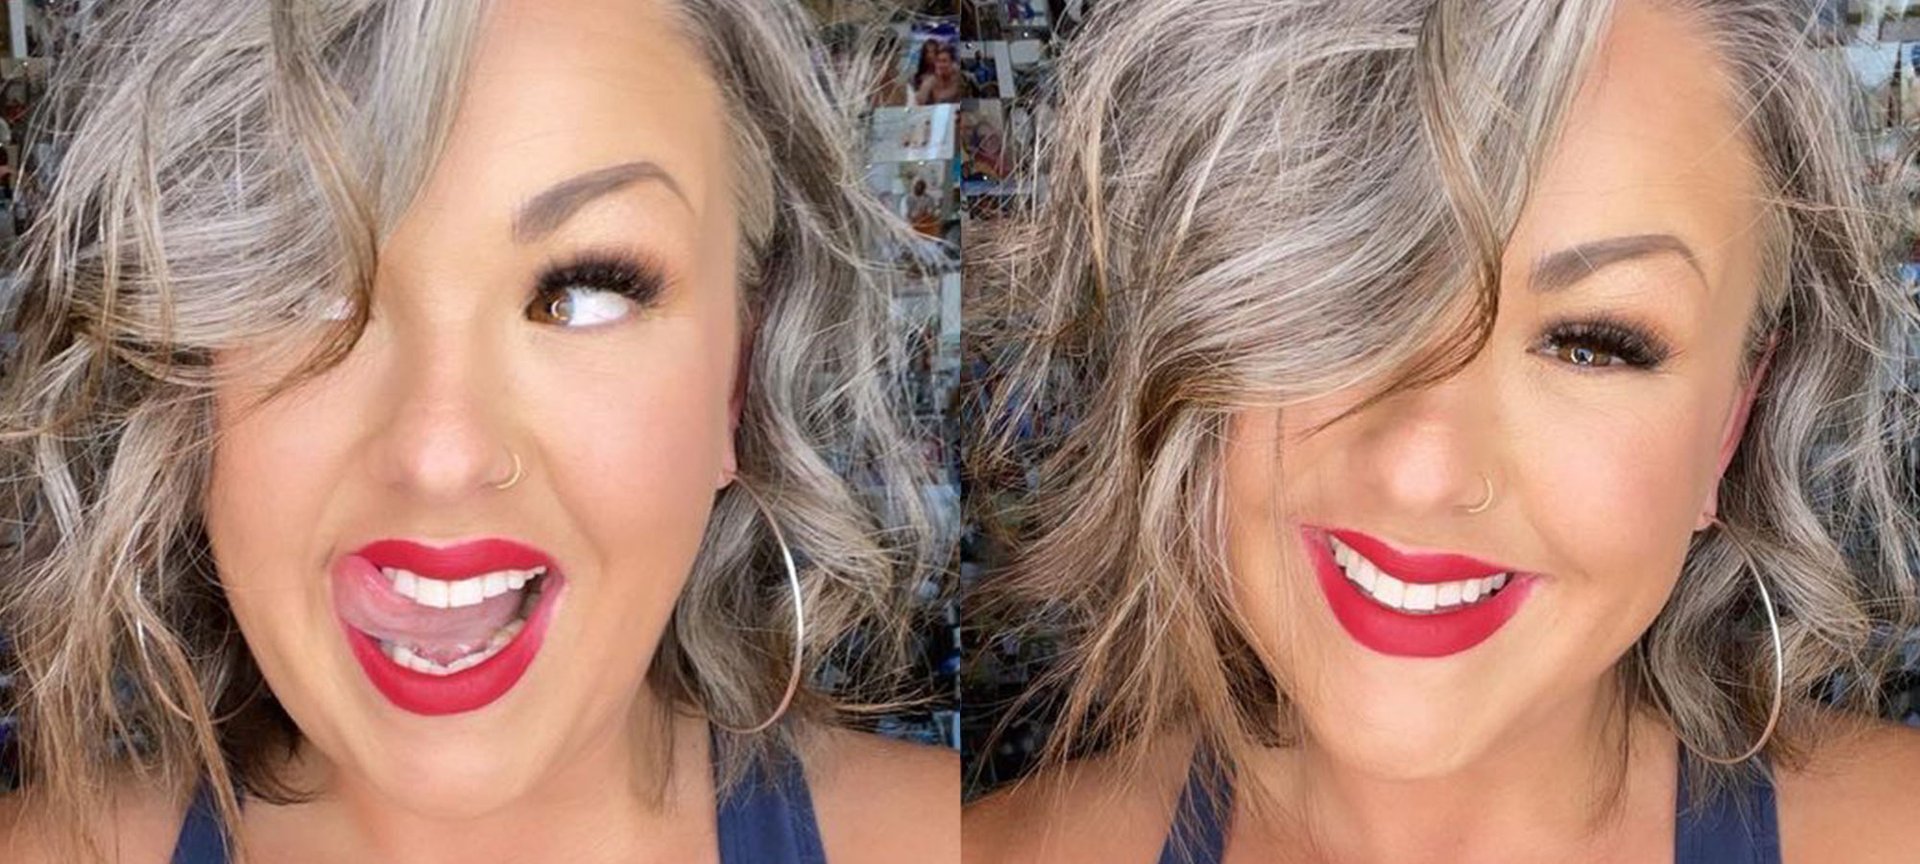 How to Transition to Gray Hair When Your Hair Is Colored - L'Oréal Paris